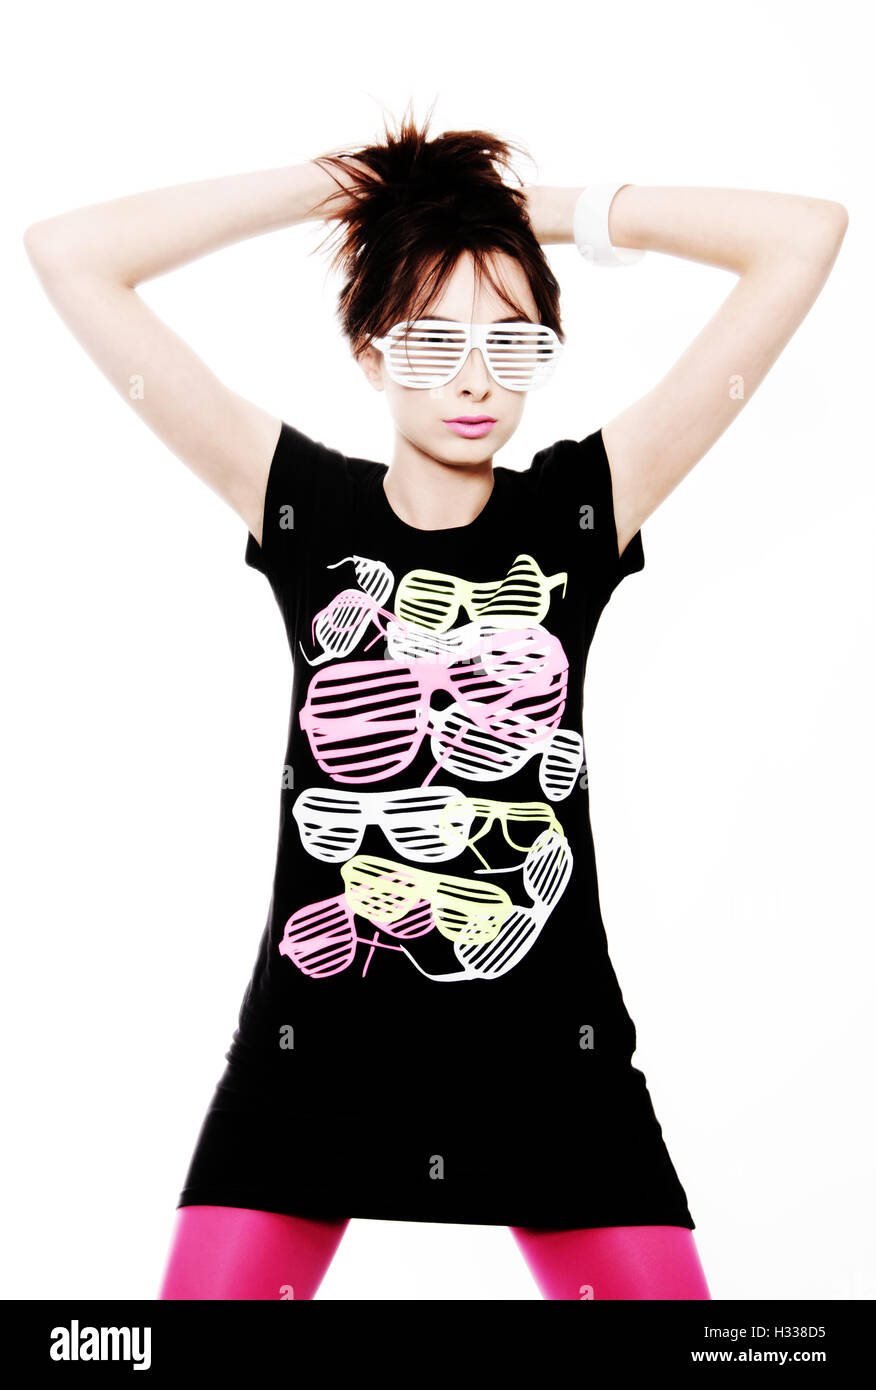 Woman, 24, posing with a cool pair of glasses and a t-shirt Stock Photo